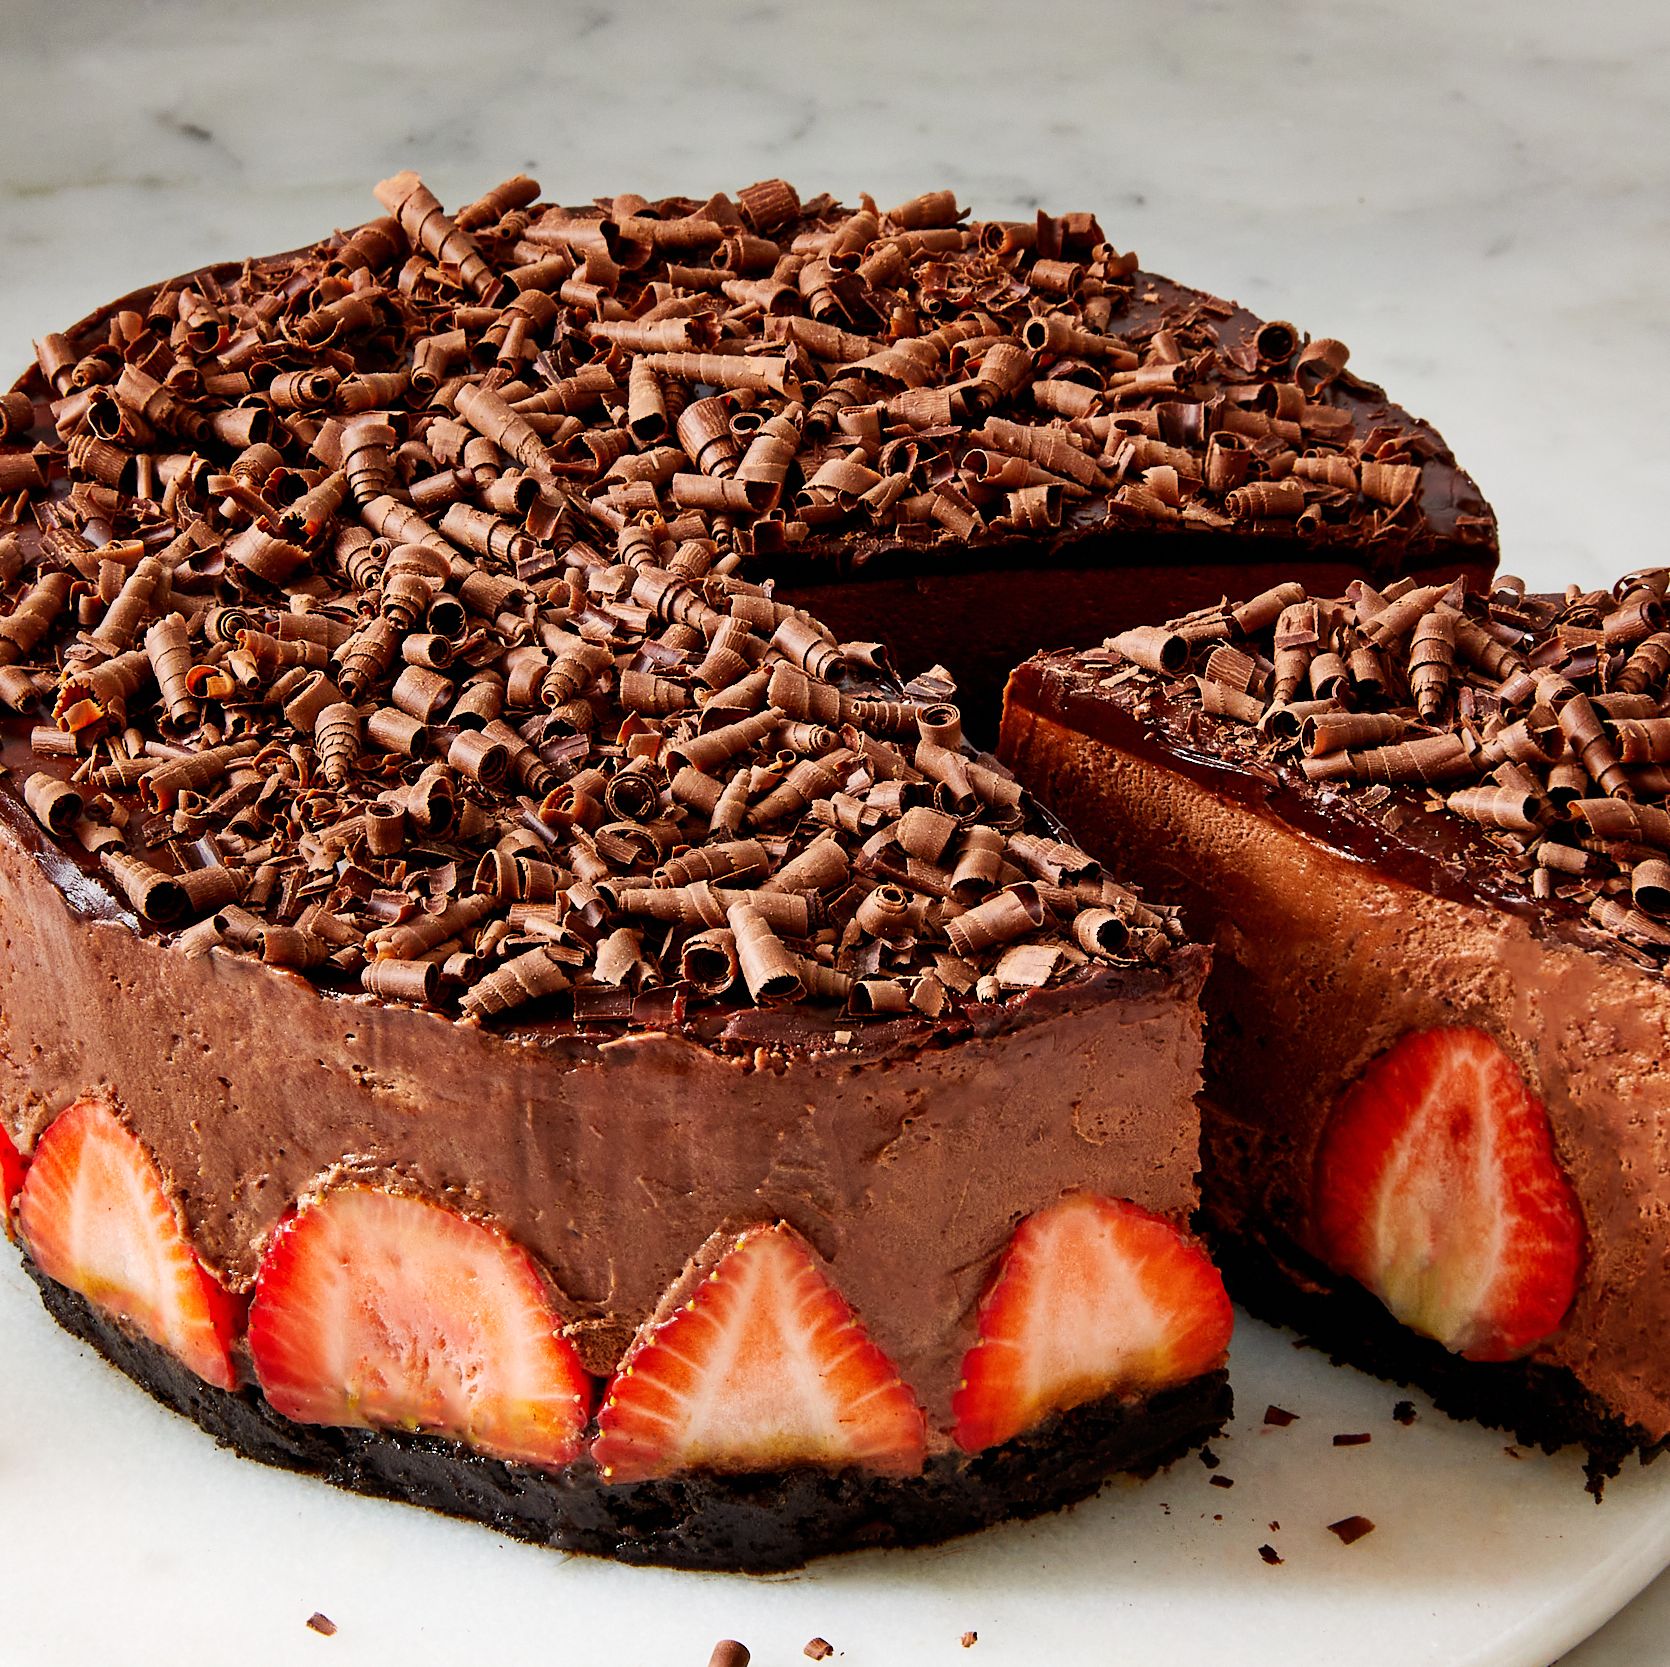 Can't Decide On One Dessert? Make Strawberry Chocolate Mousse Cake & Have It All